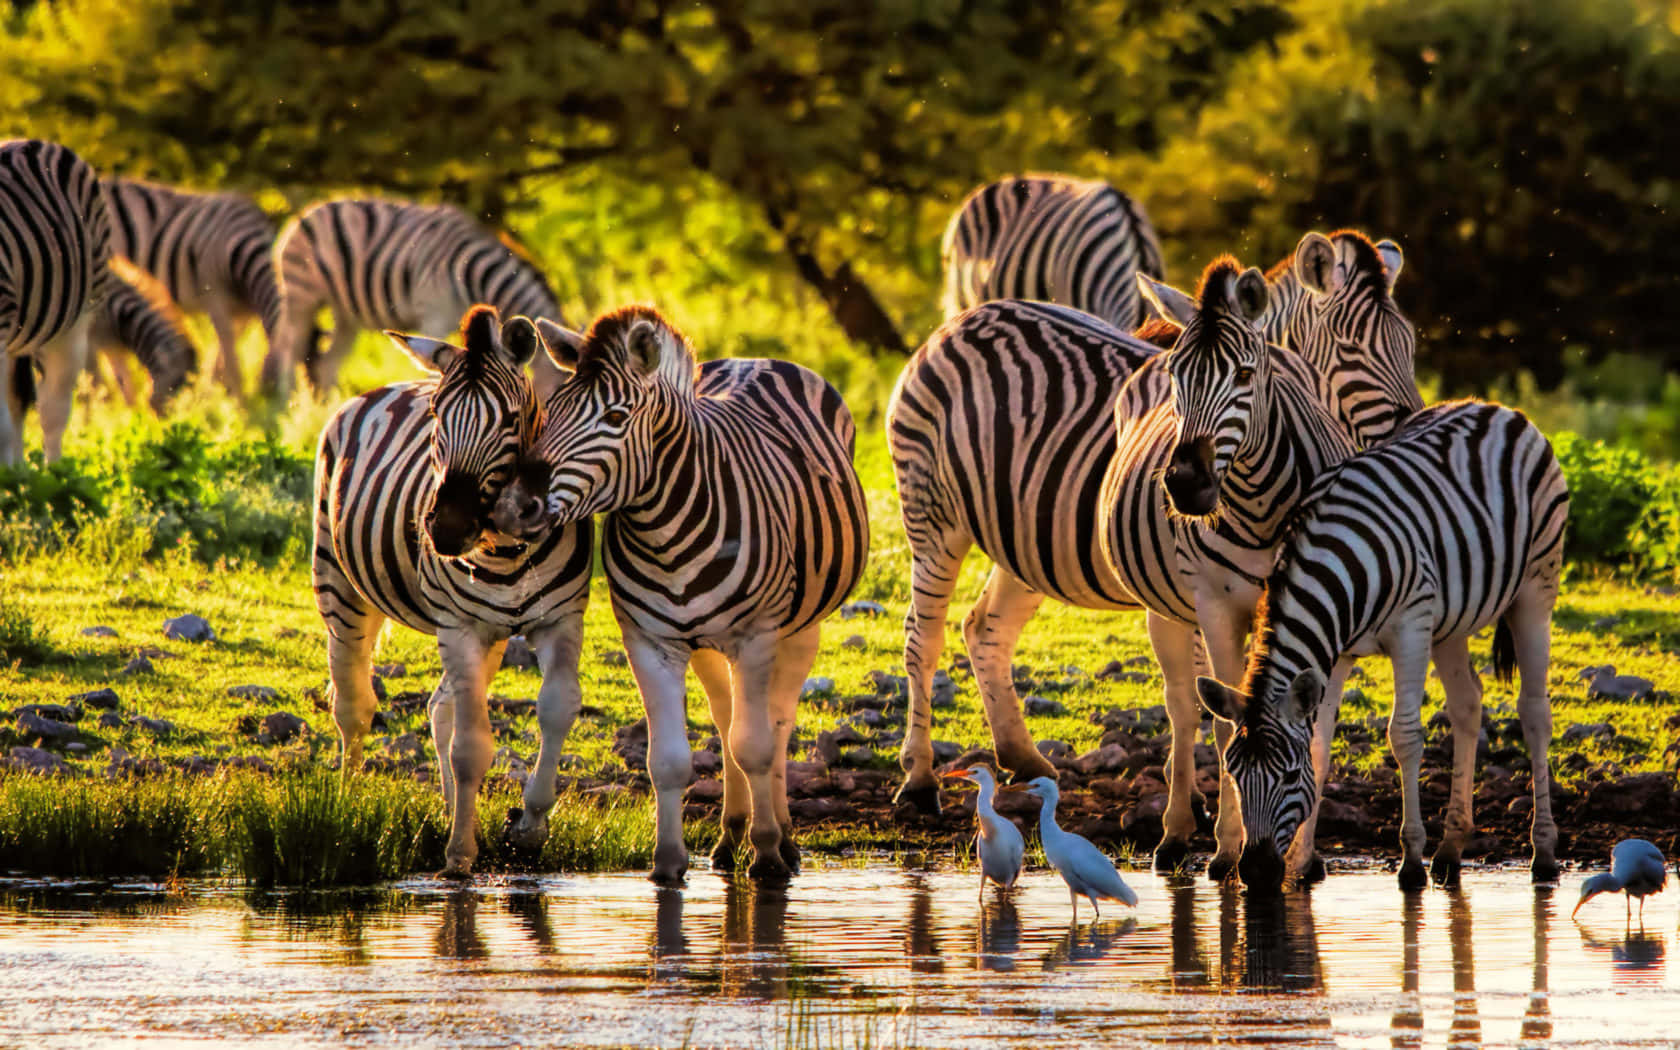 Wild Animals Zebras By Lake Picture